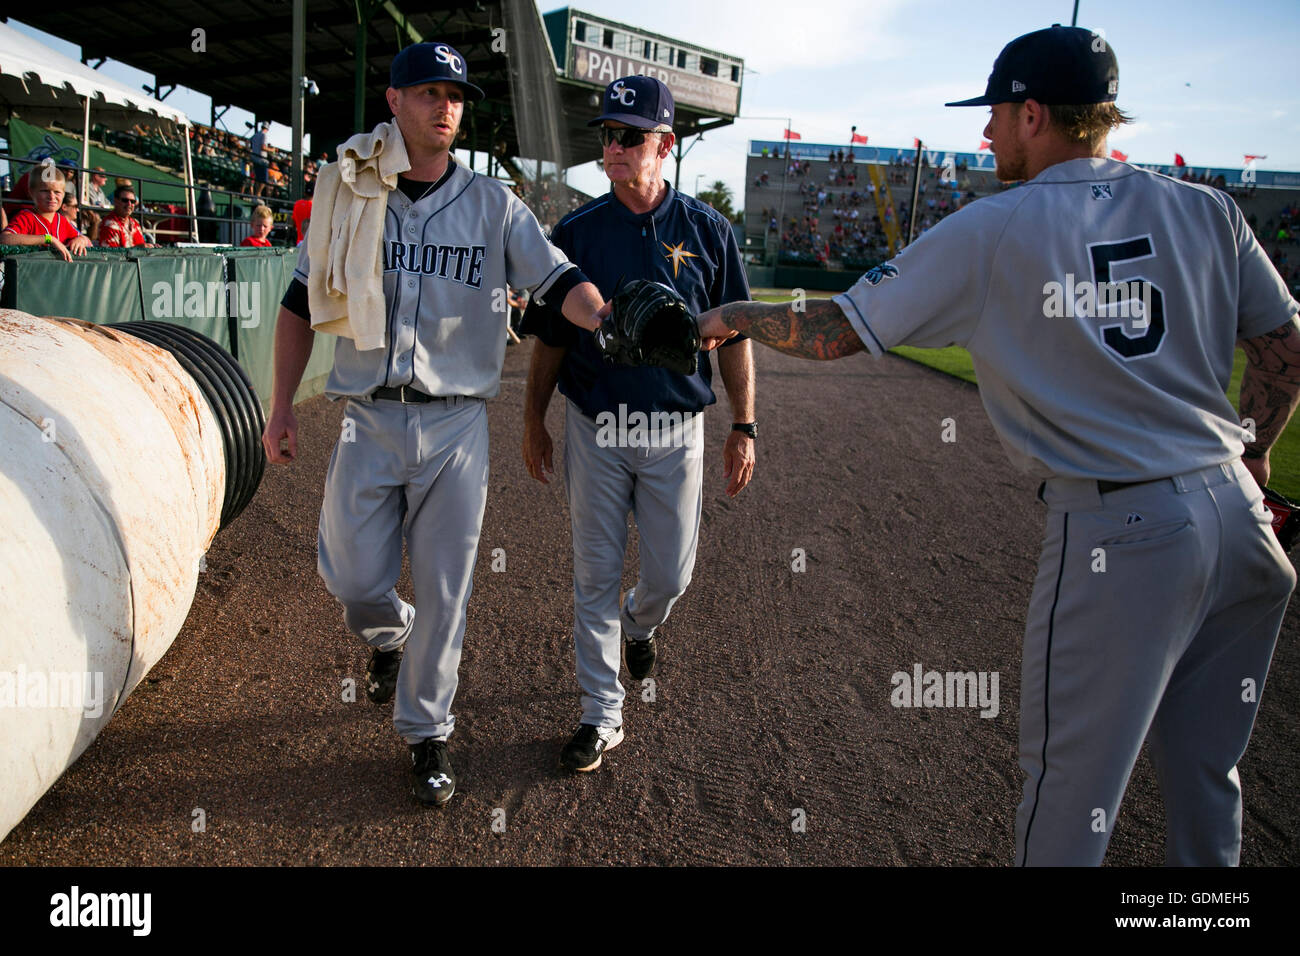 Daytona Beach, Florida, USA. 11th July, 2016. WILL VRAGOVIC | Times.Tampa Bay Rays starting pitcher Alex Cobb, left, gets a fist bump from Charlotte Stone Crabs pitcher Nick Sawyer, right, as he walks to the clubhouse with Charlotte Stone Crabs pitching coach Steve 'Doc' Watson, center, after being relieved after the first inning the game between the Charlotte Stone Crabs and Daytona Tortugas at Jackie Robinson Ballpark in Daytona Beach, Fla. on Monday, July 11, 2016. This was Cobb's second start of his rehab assignment with the Stone Crabs. (Credit Image: © Will Vragovic/Tampa Bay Times Stock Photo